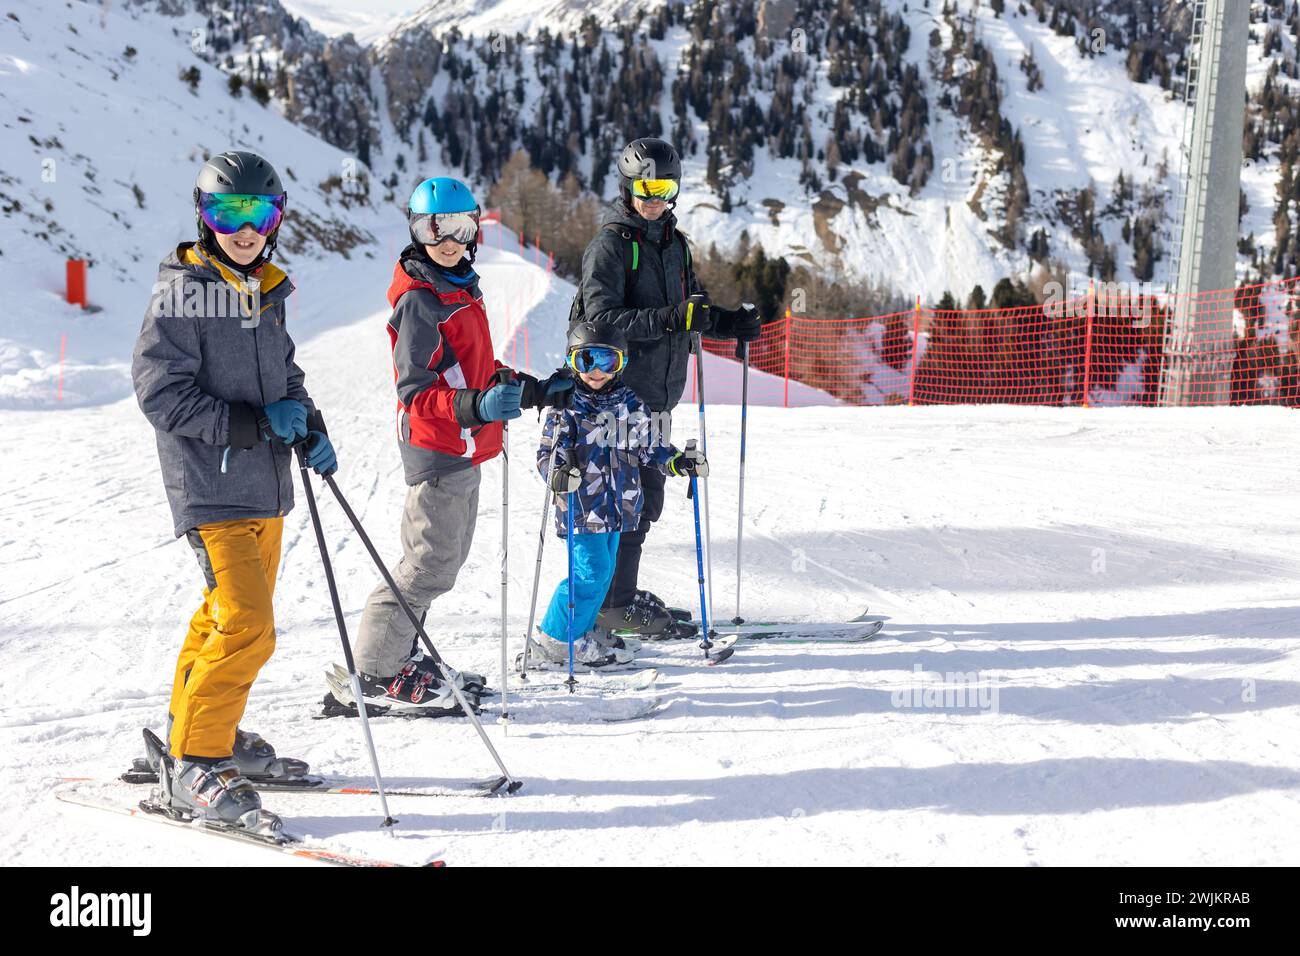 Children and adults, happy family in winter clothing at ski vacation, skiing, wintertime Stock Photo